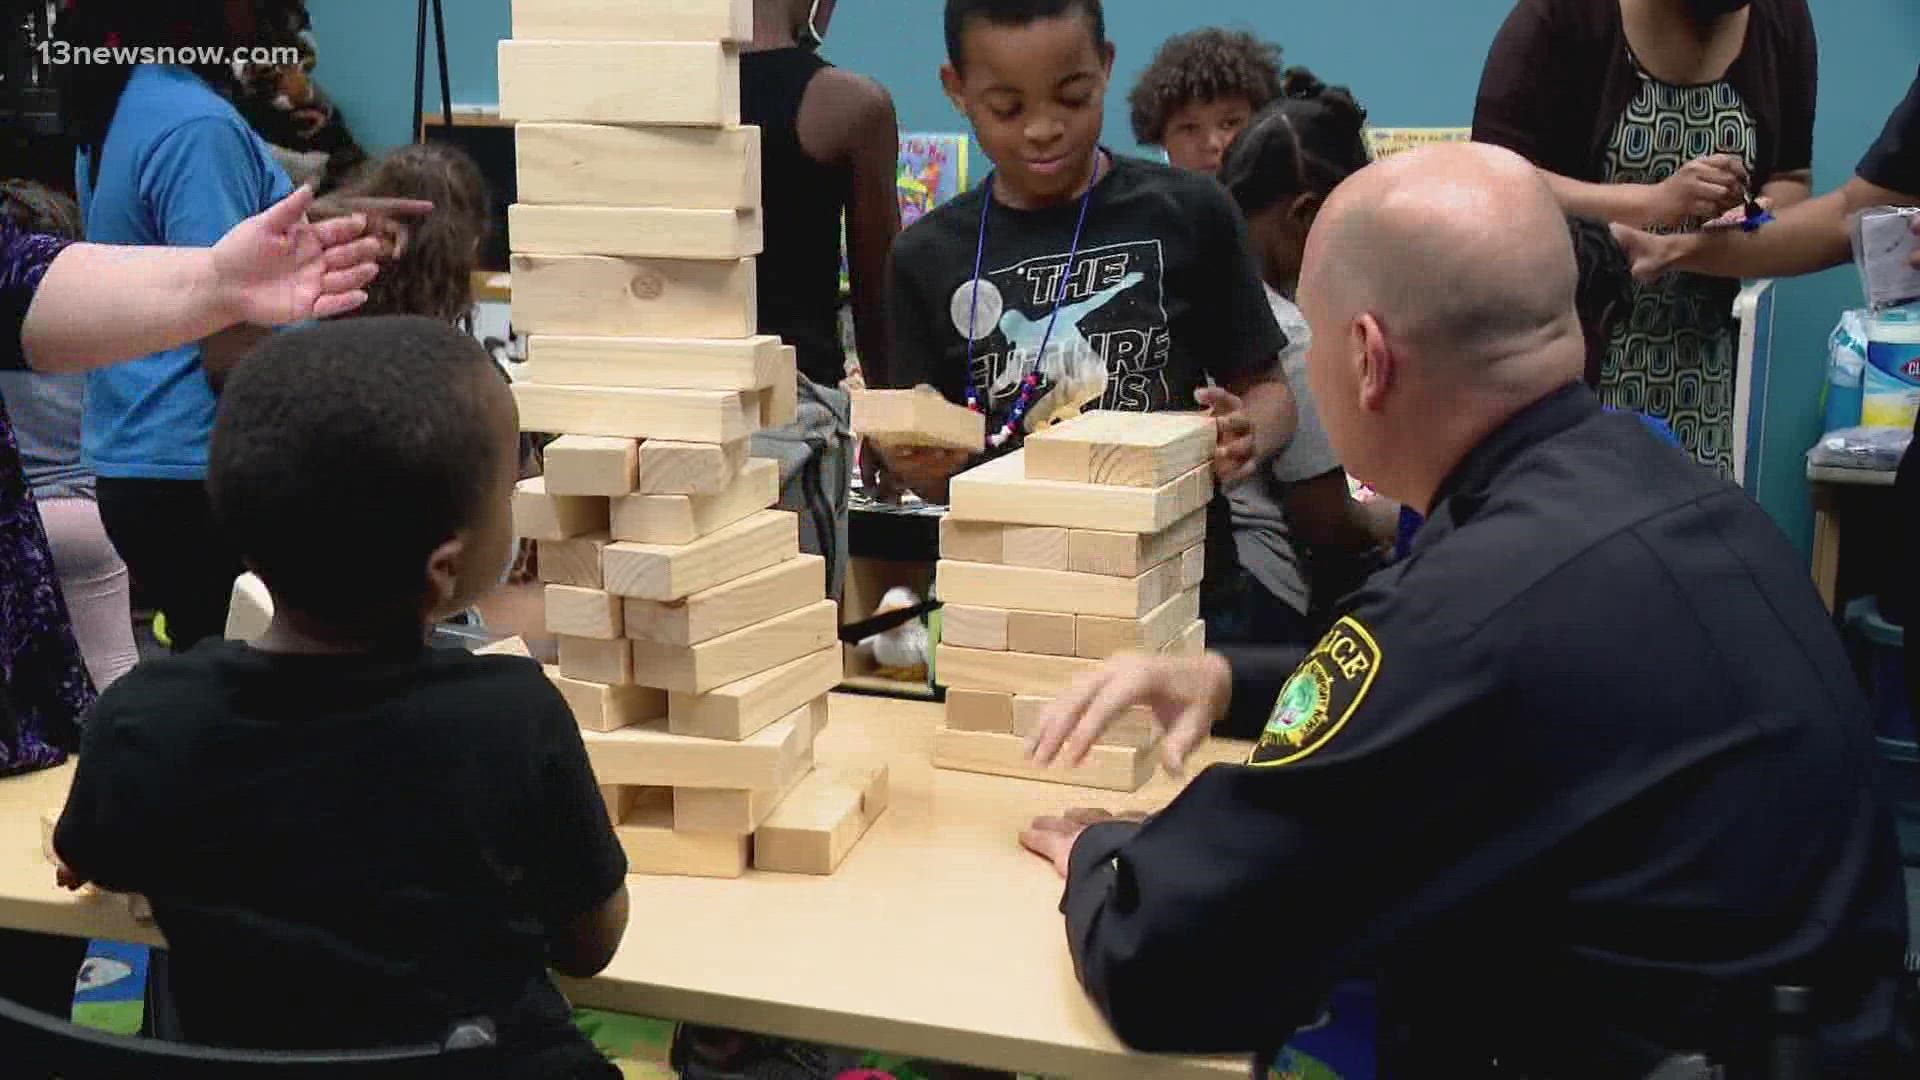 From Norfolk to Chesapeake, neighborhoods across Hampton Roads are bringing law enforcement officers and families together to celebrate positive relationships.